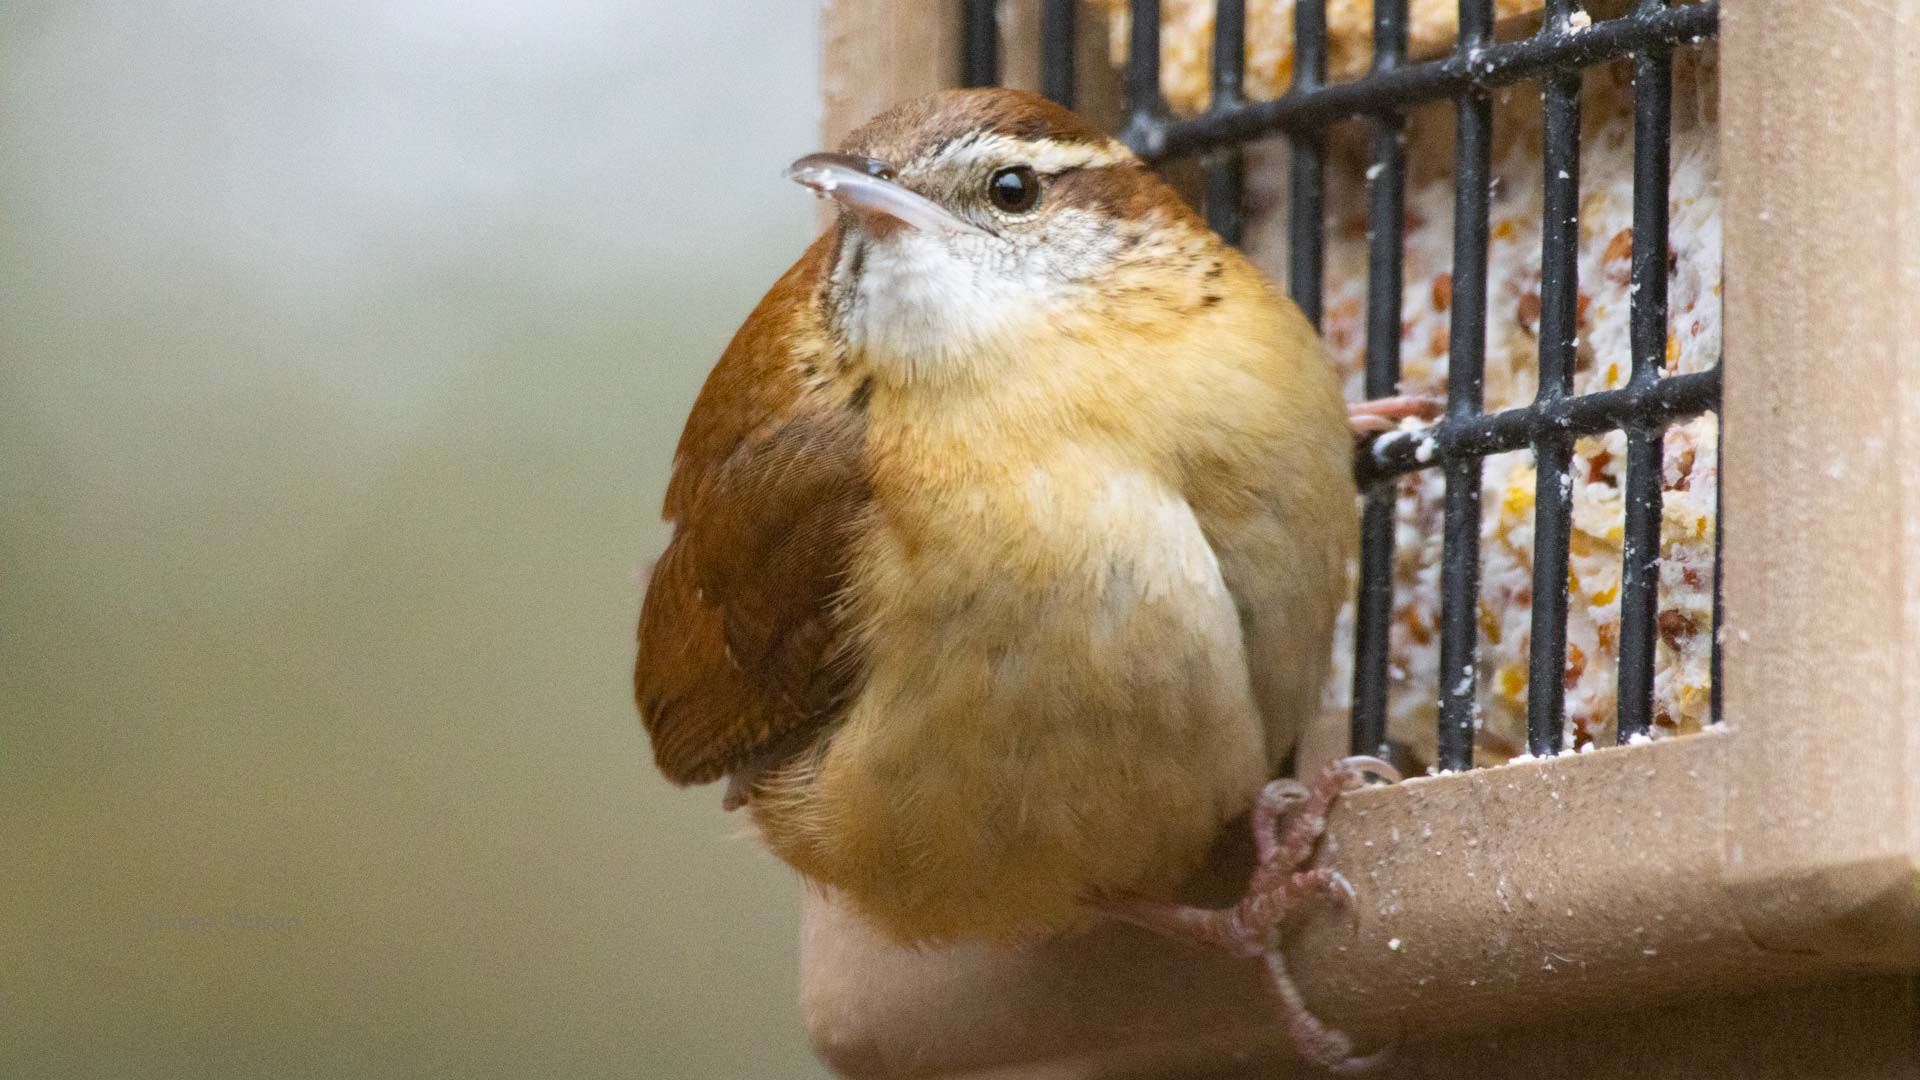 brown, burnt yellow, and white bird on the side of a suet feeder